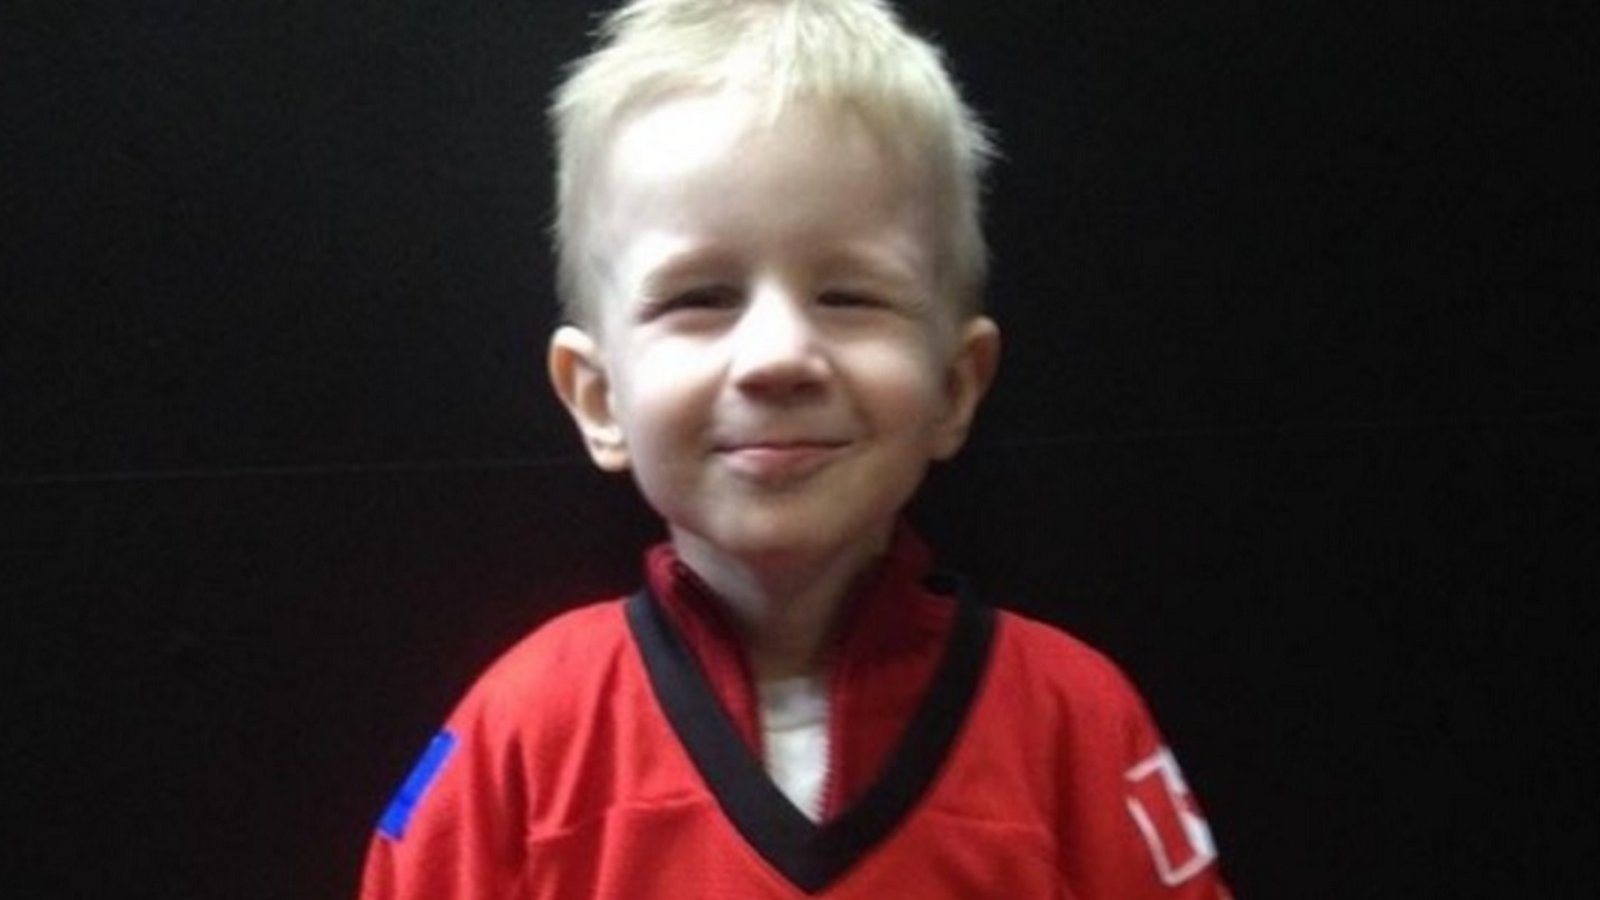 Four-year-old NHL fan with terminal cancer not expected to last the week, but you can help.